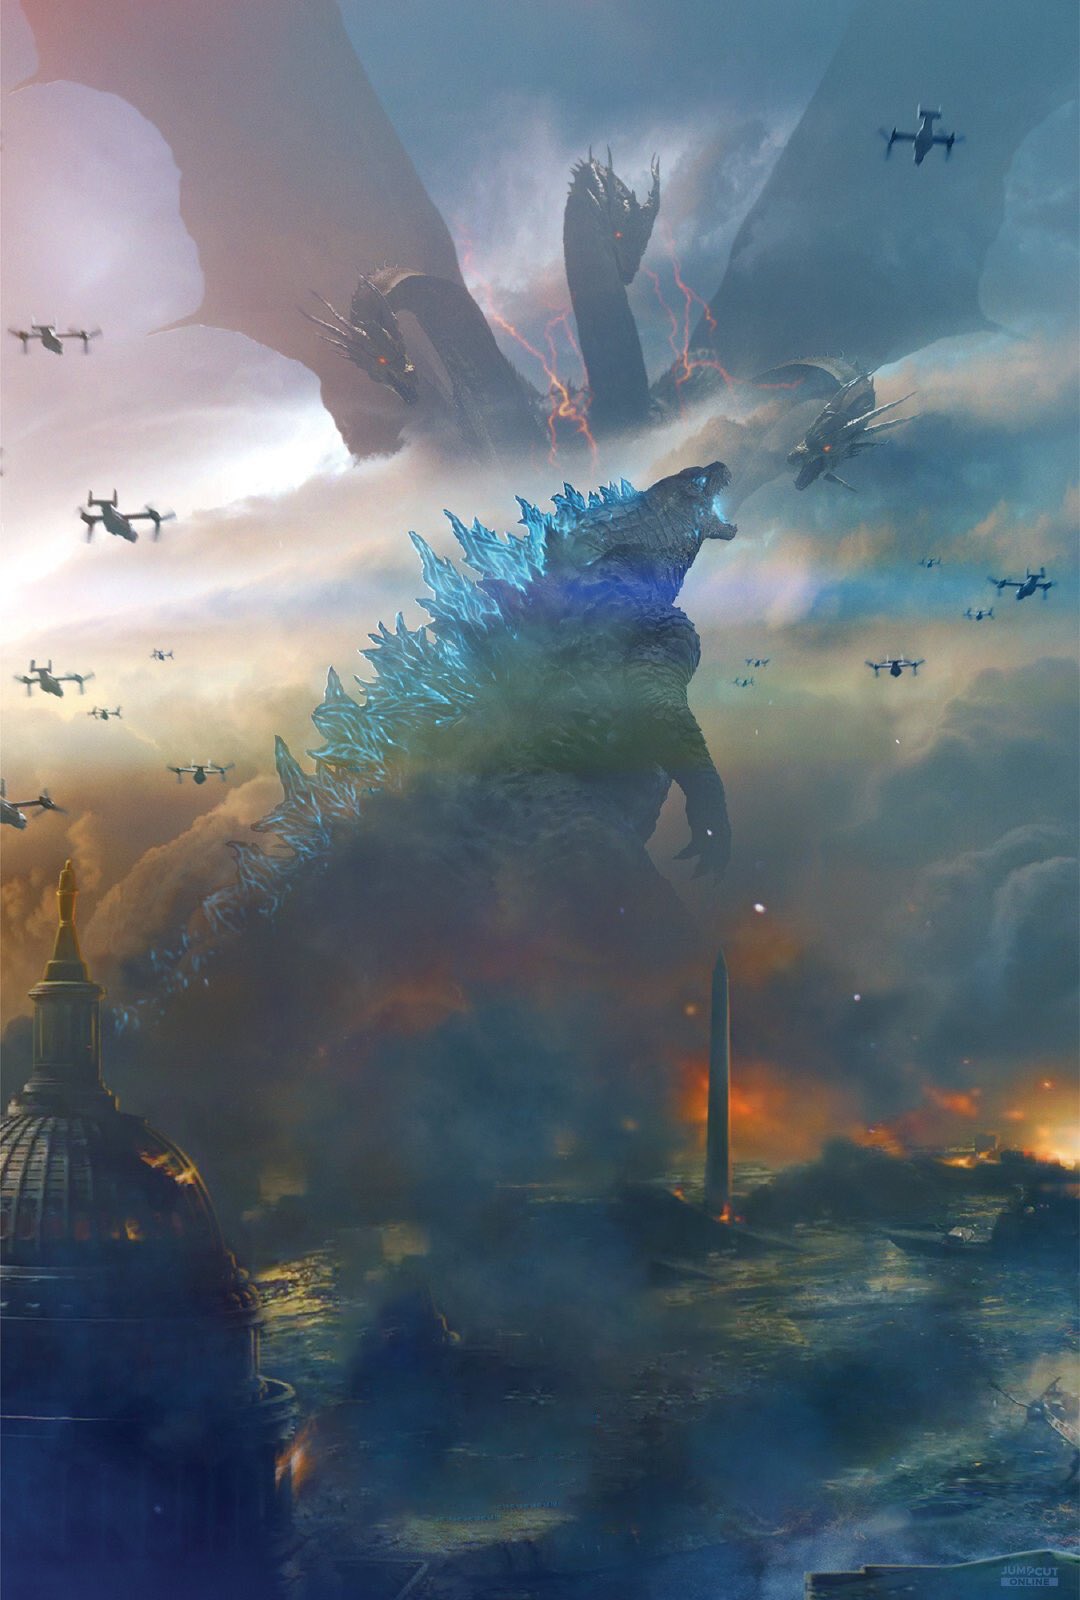 Godzilla 2 RealD 3D poster TEXTLESS - Godzilla 2: King of the Monsters